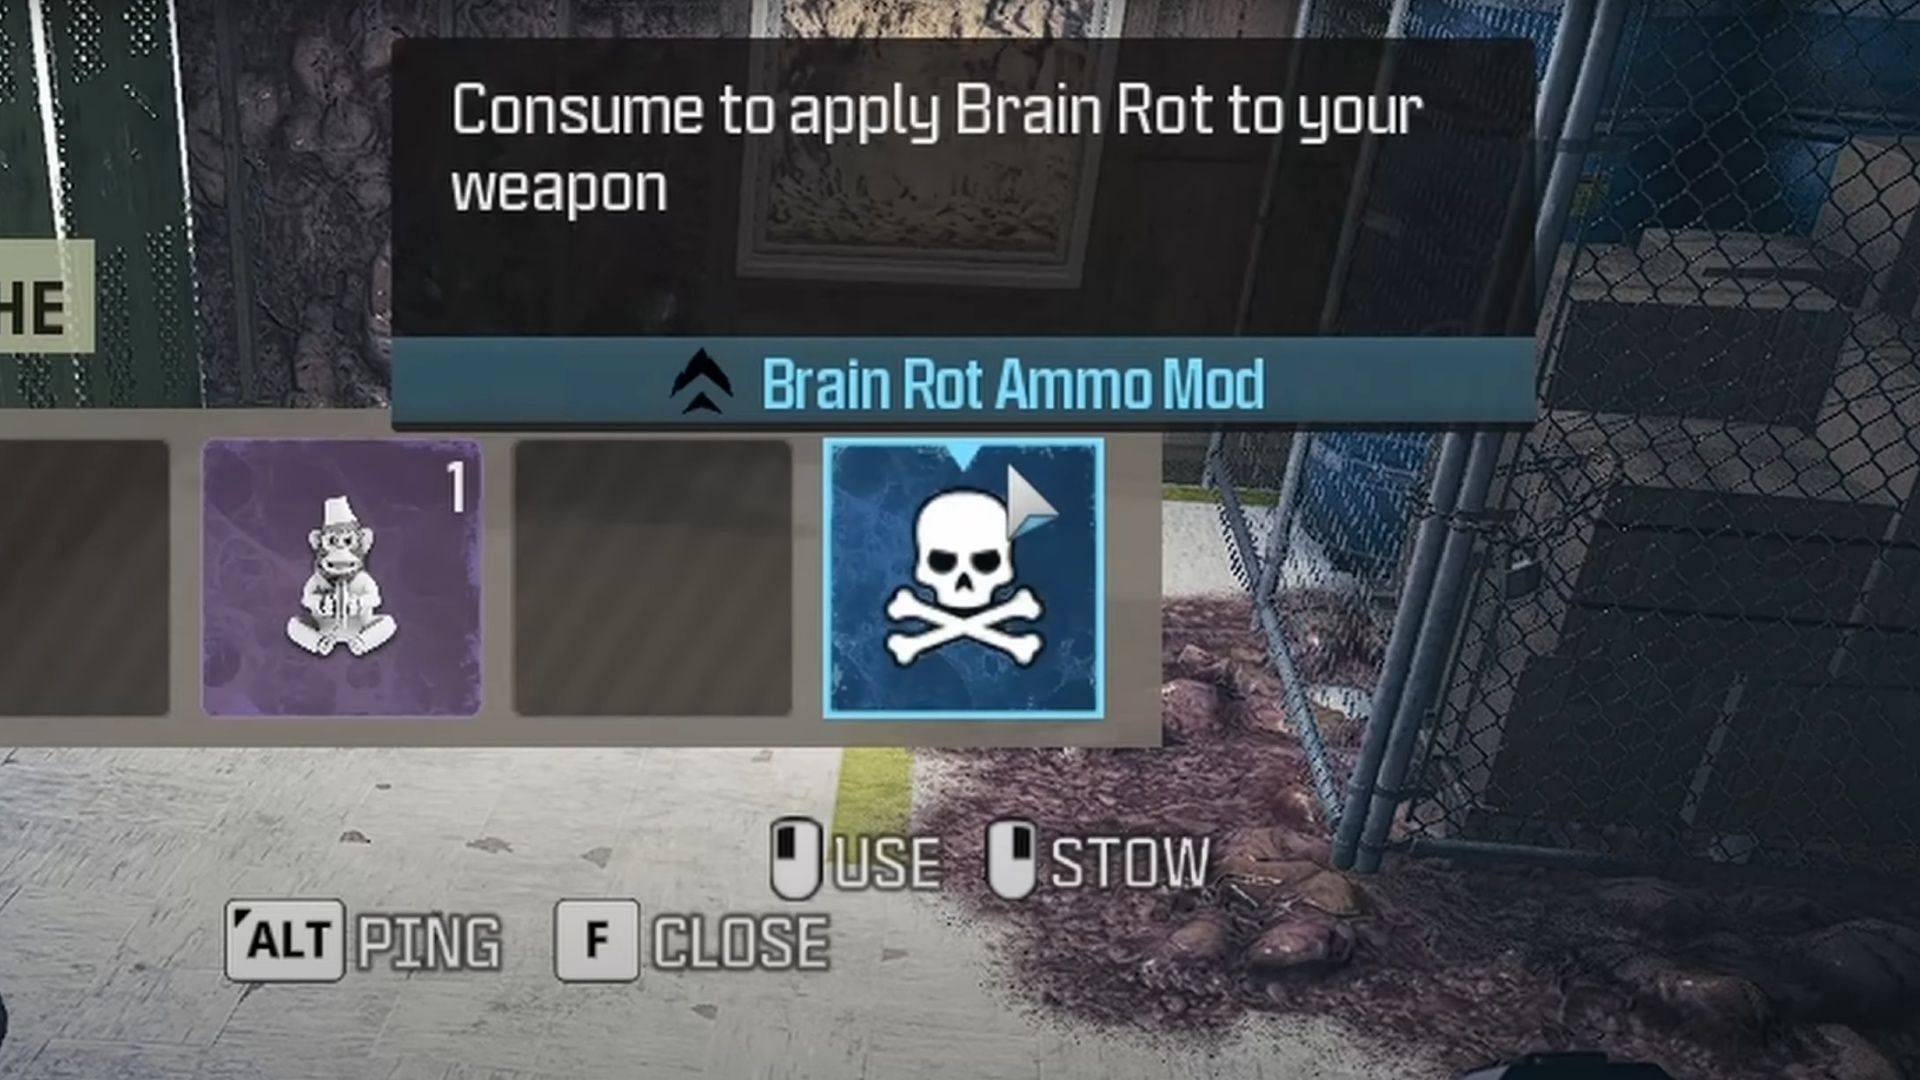 Brain Rot Ammo Mod in Zombies (Image via Activision)